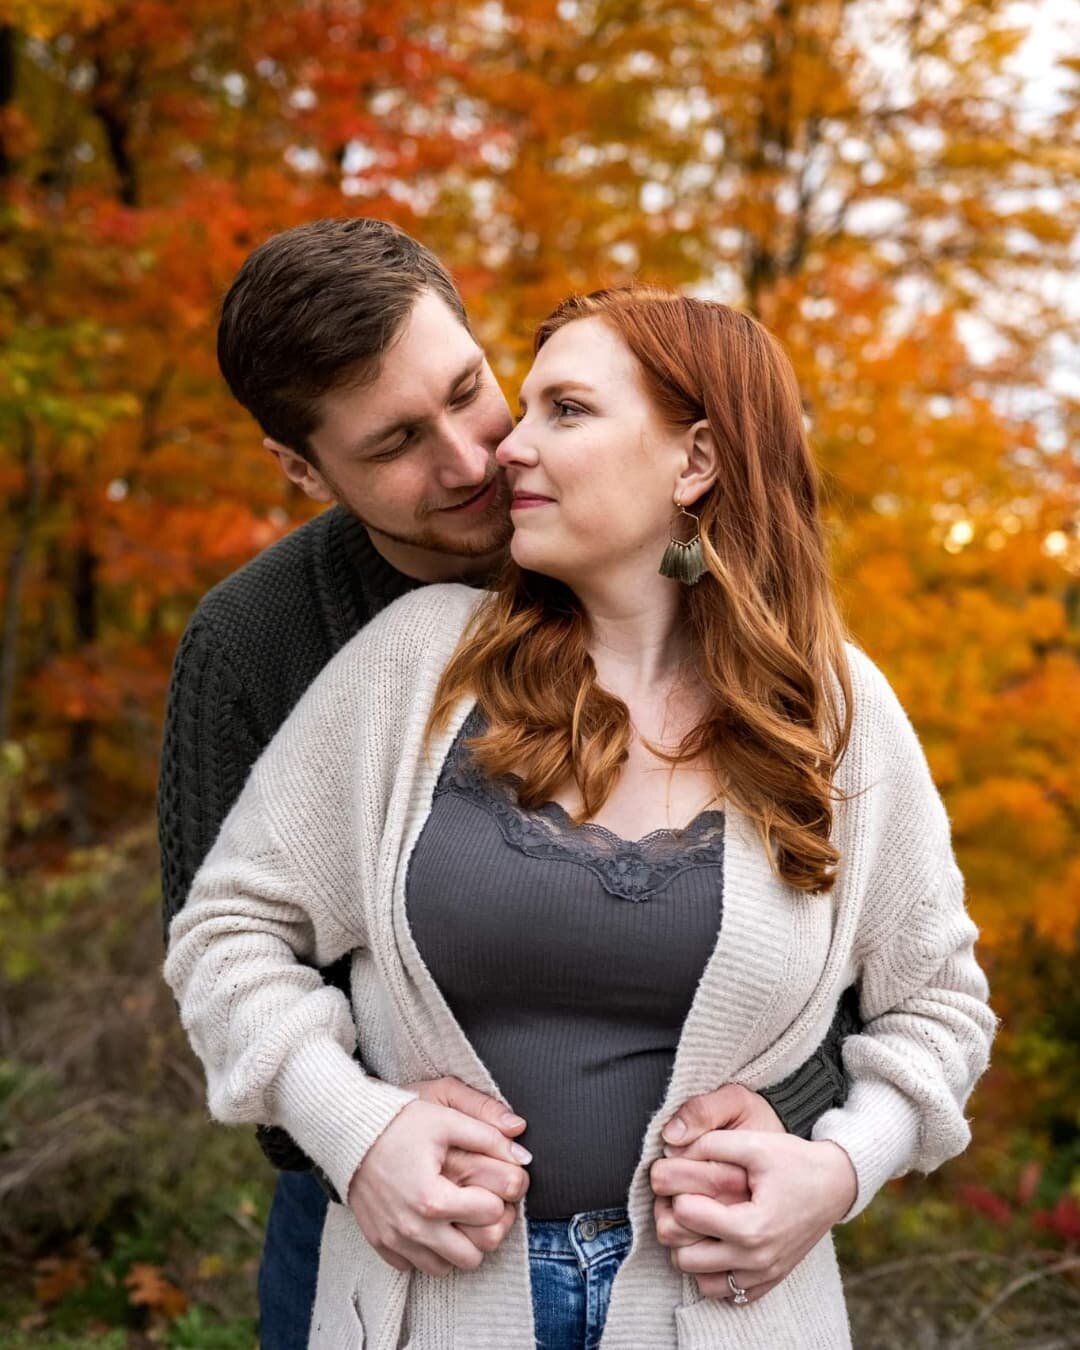 I love photographing engagement sessions and couples. It's like a date night and I provide the entertainment 💁&zwj;♀️📷💍. Also can we talk about these fall colors 😍🍂🍃🍁
.
.
.
.
.
.
.
.
.
.
#engagementphotos #engagement #engagementsession #engage